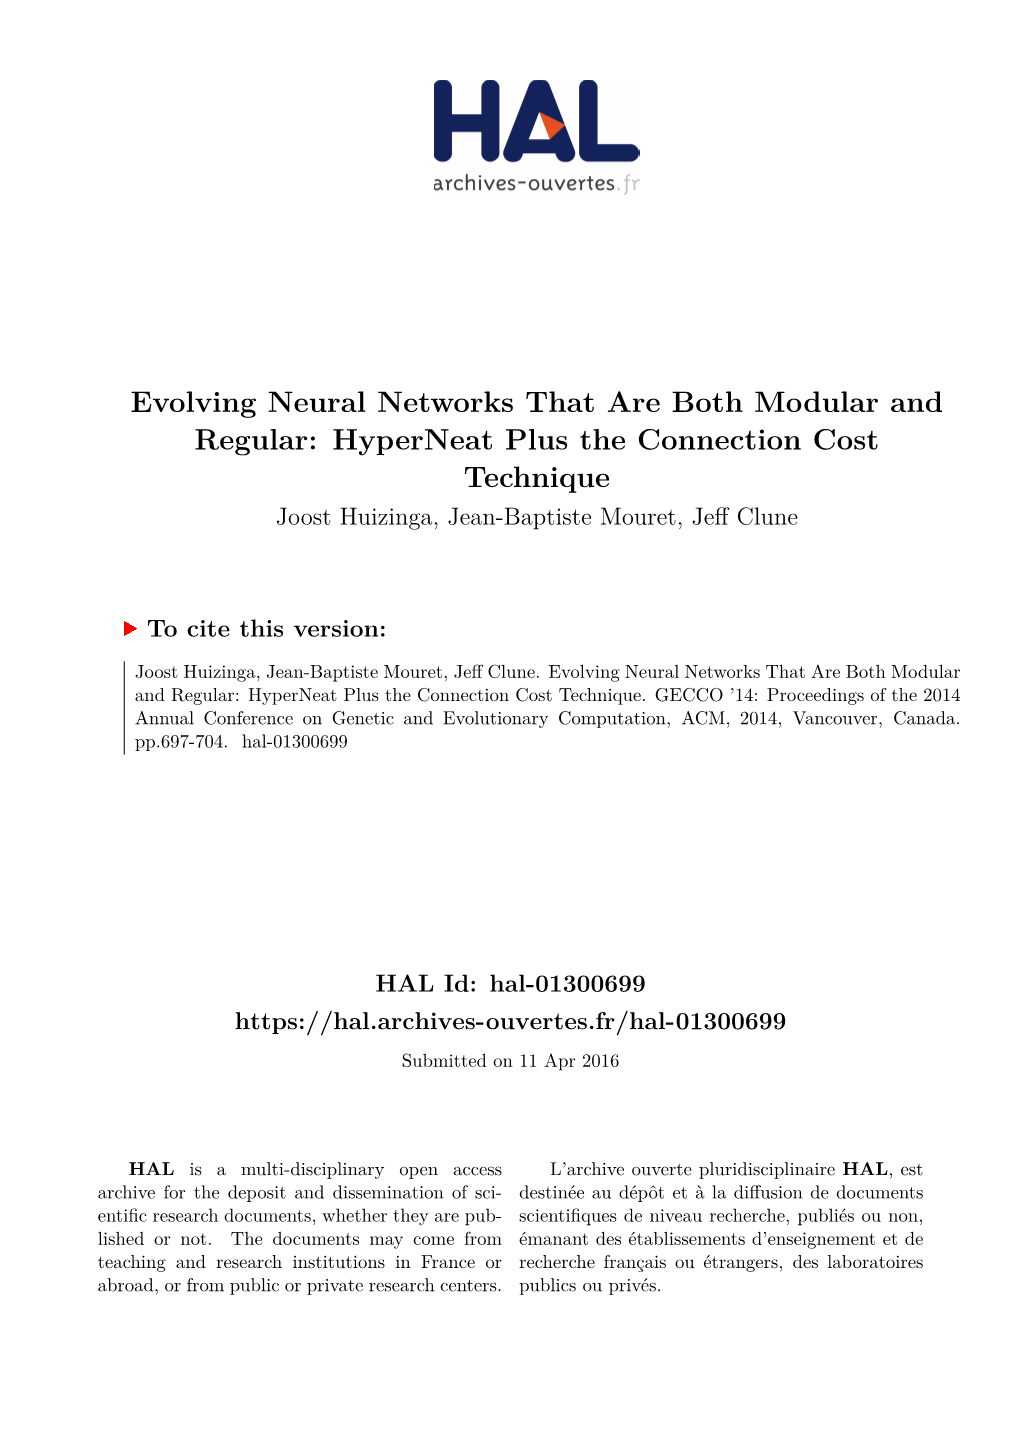 Evolving Neural Networks That Are Both Modular and Regular: Hyperneat Plus the Connection Cost Technique Joost Huizinga, Jean-Baptiste Mouret, Jeff Clune